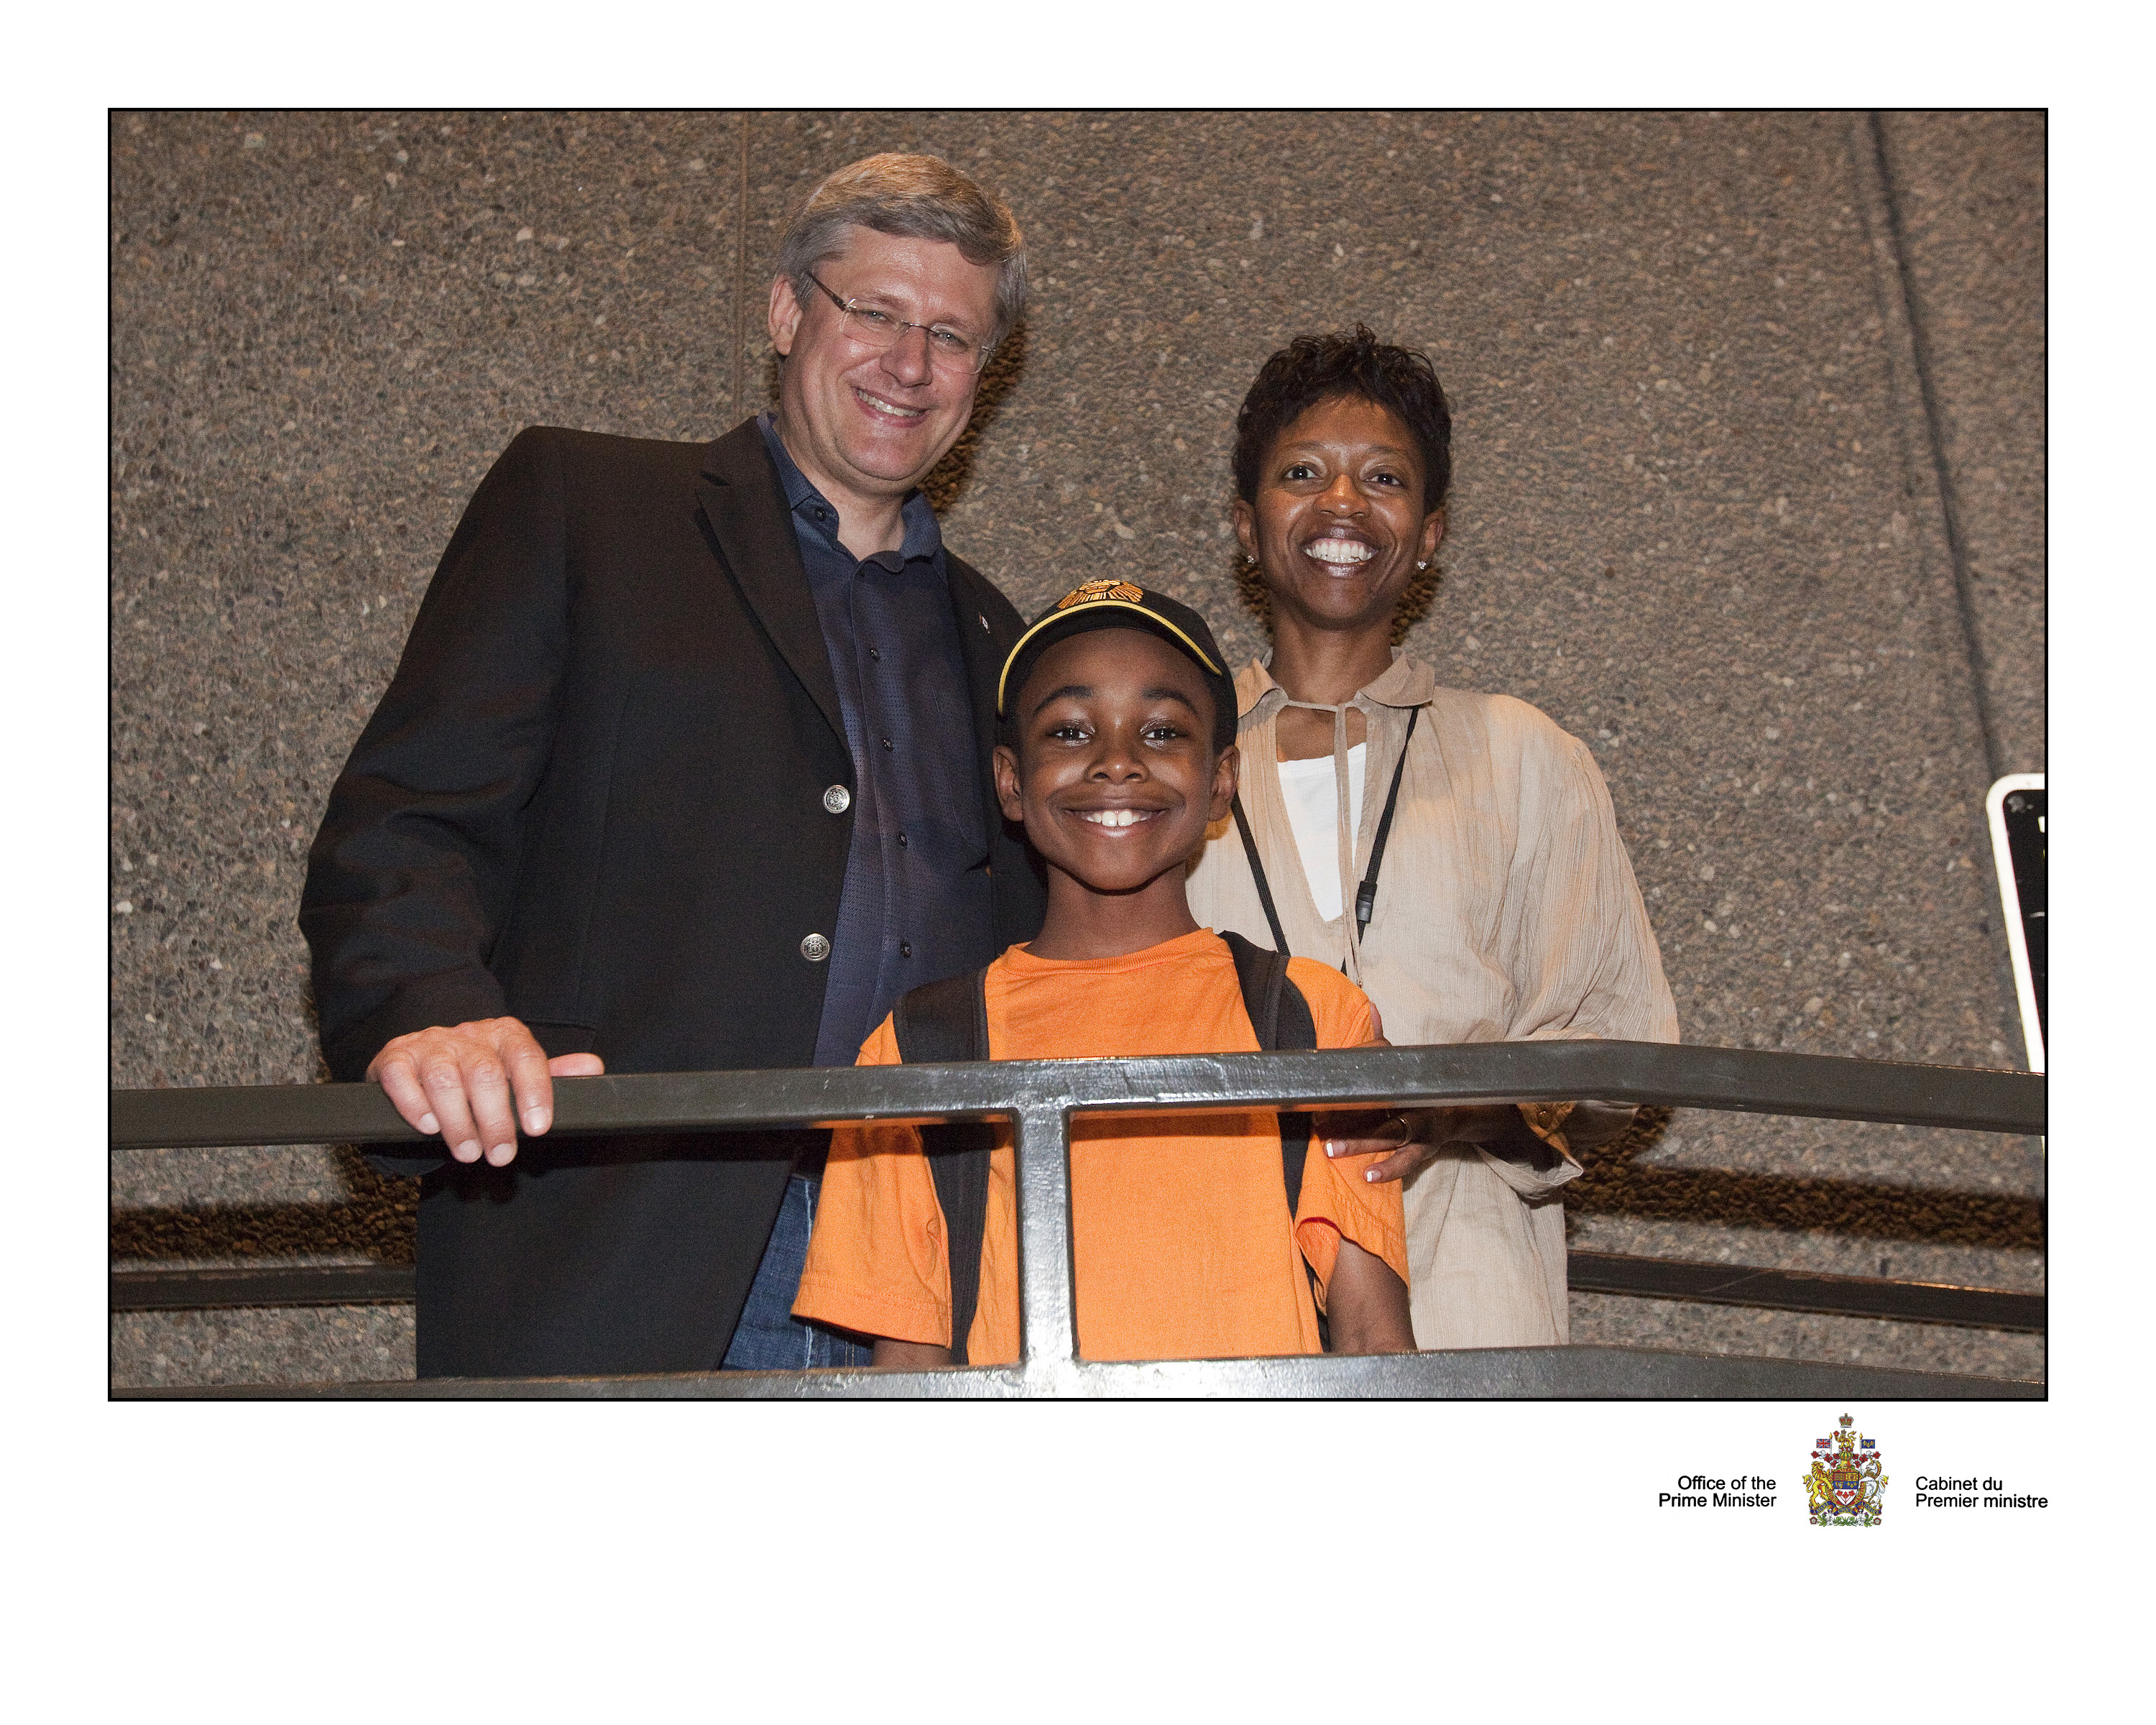 A post Lion King performance photo with the Prime Minister of Canada, The Honourable Stephen Harper